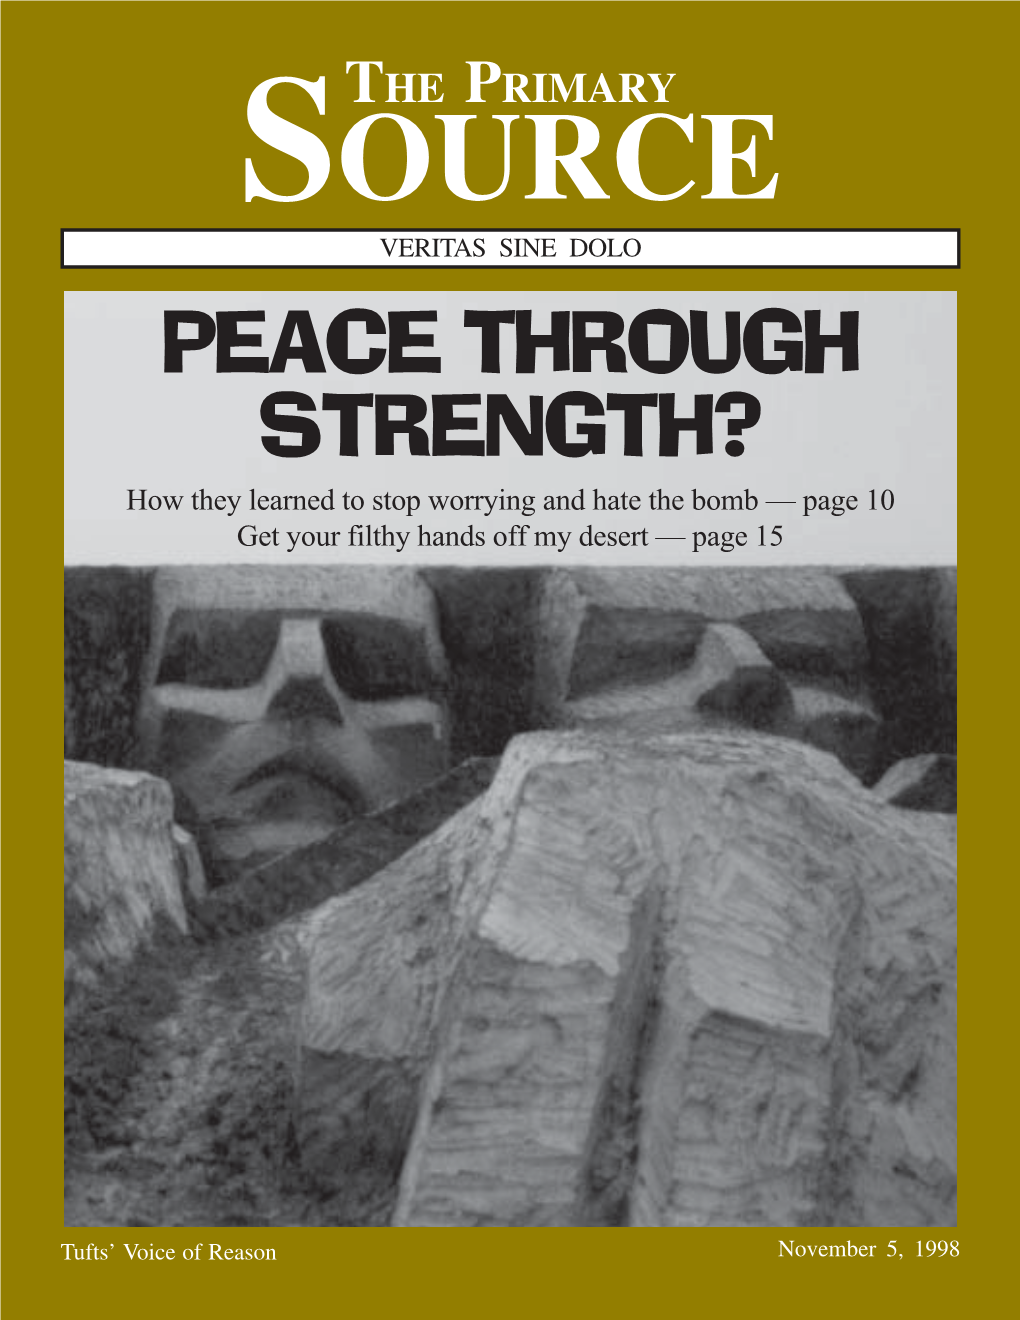 PEACE THROUGH STRENGTH? How They Learned to Stop Worrying and Hate the Bomb — Page 10 Get Your Filthy Hands Off My Desert — Page 15